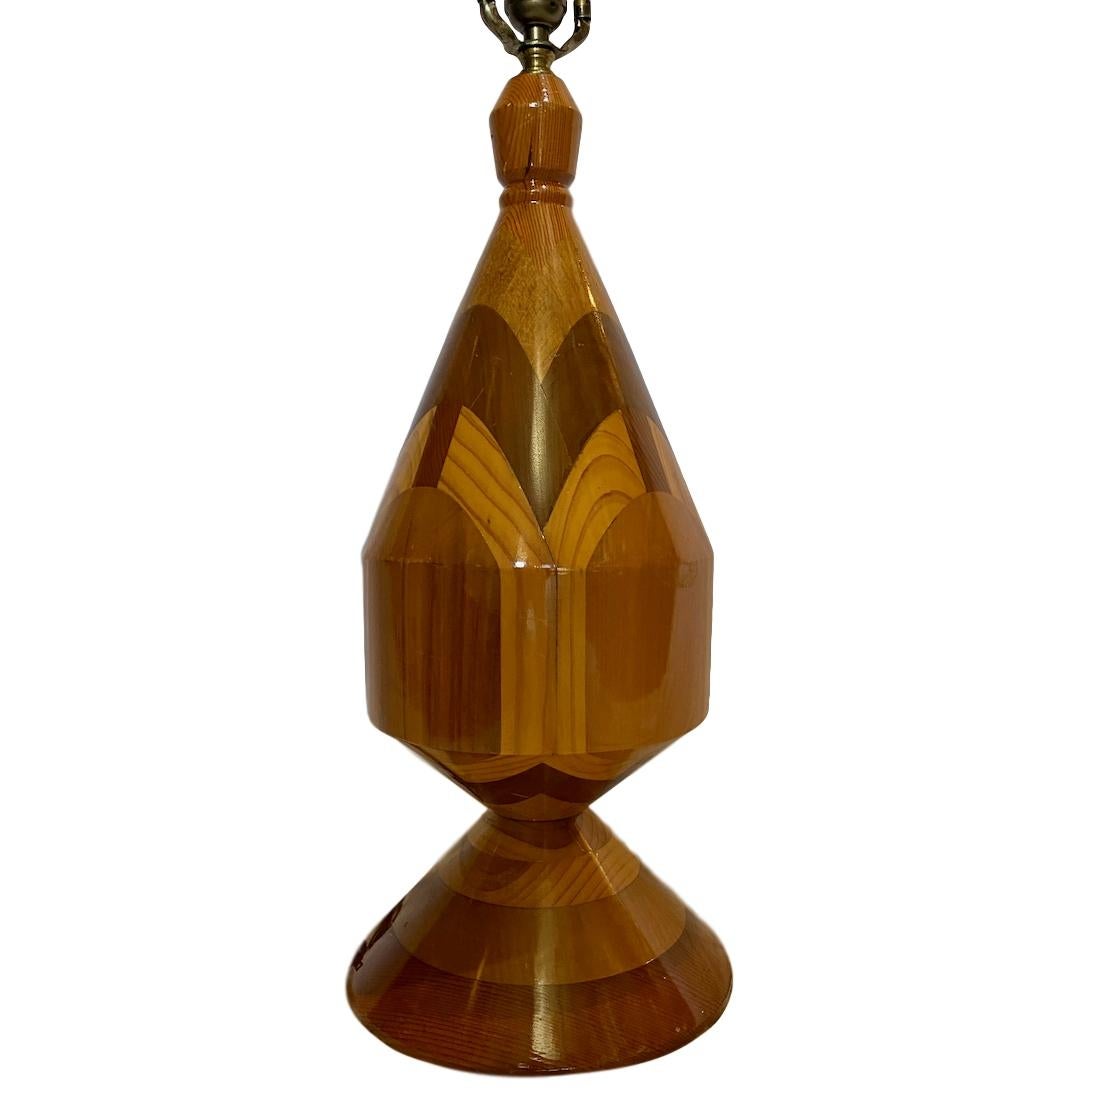 A large single circa 1960s Italian marquetry wood lamp.

Measurements:
Height of body 23